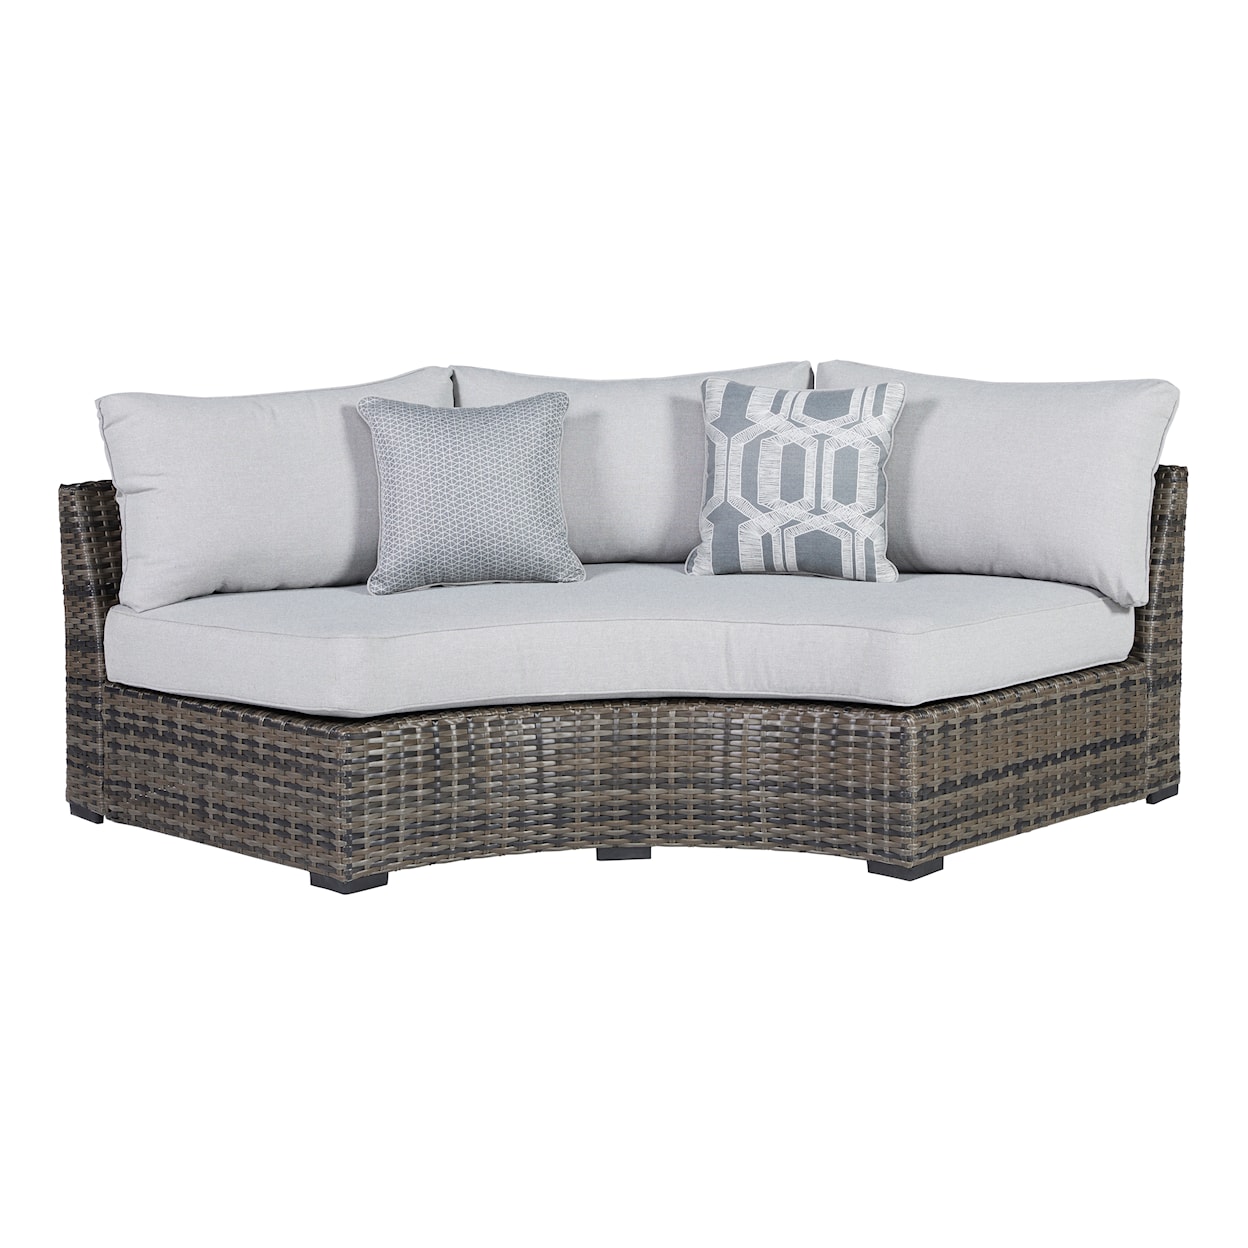 Signature Design by Ashley Harbor Court Curved Loveseat with Cushion